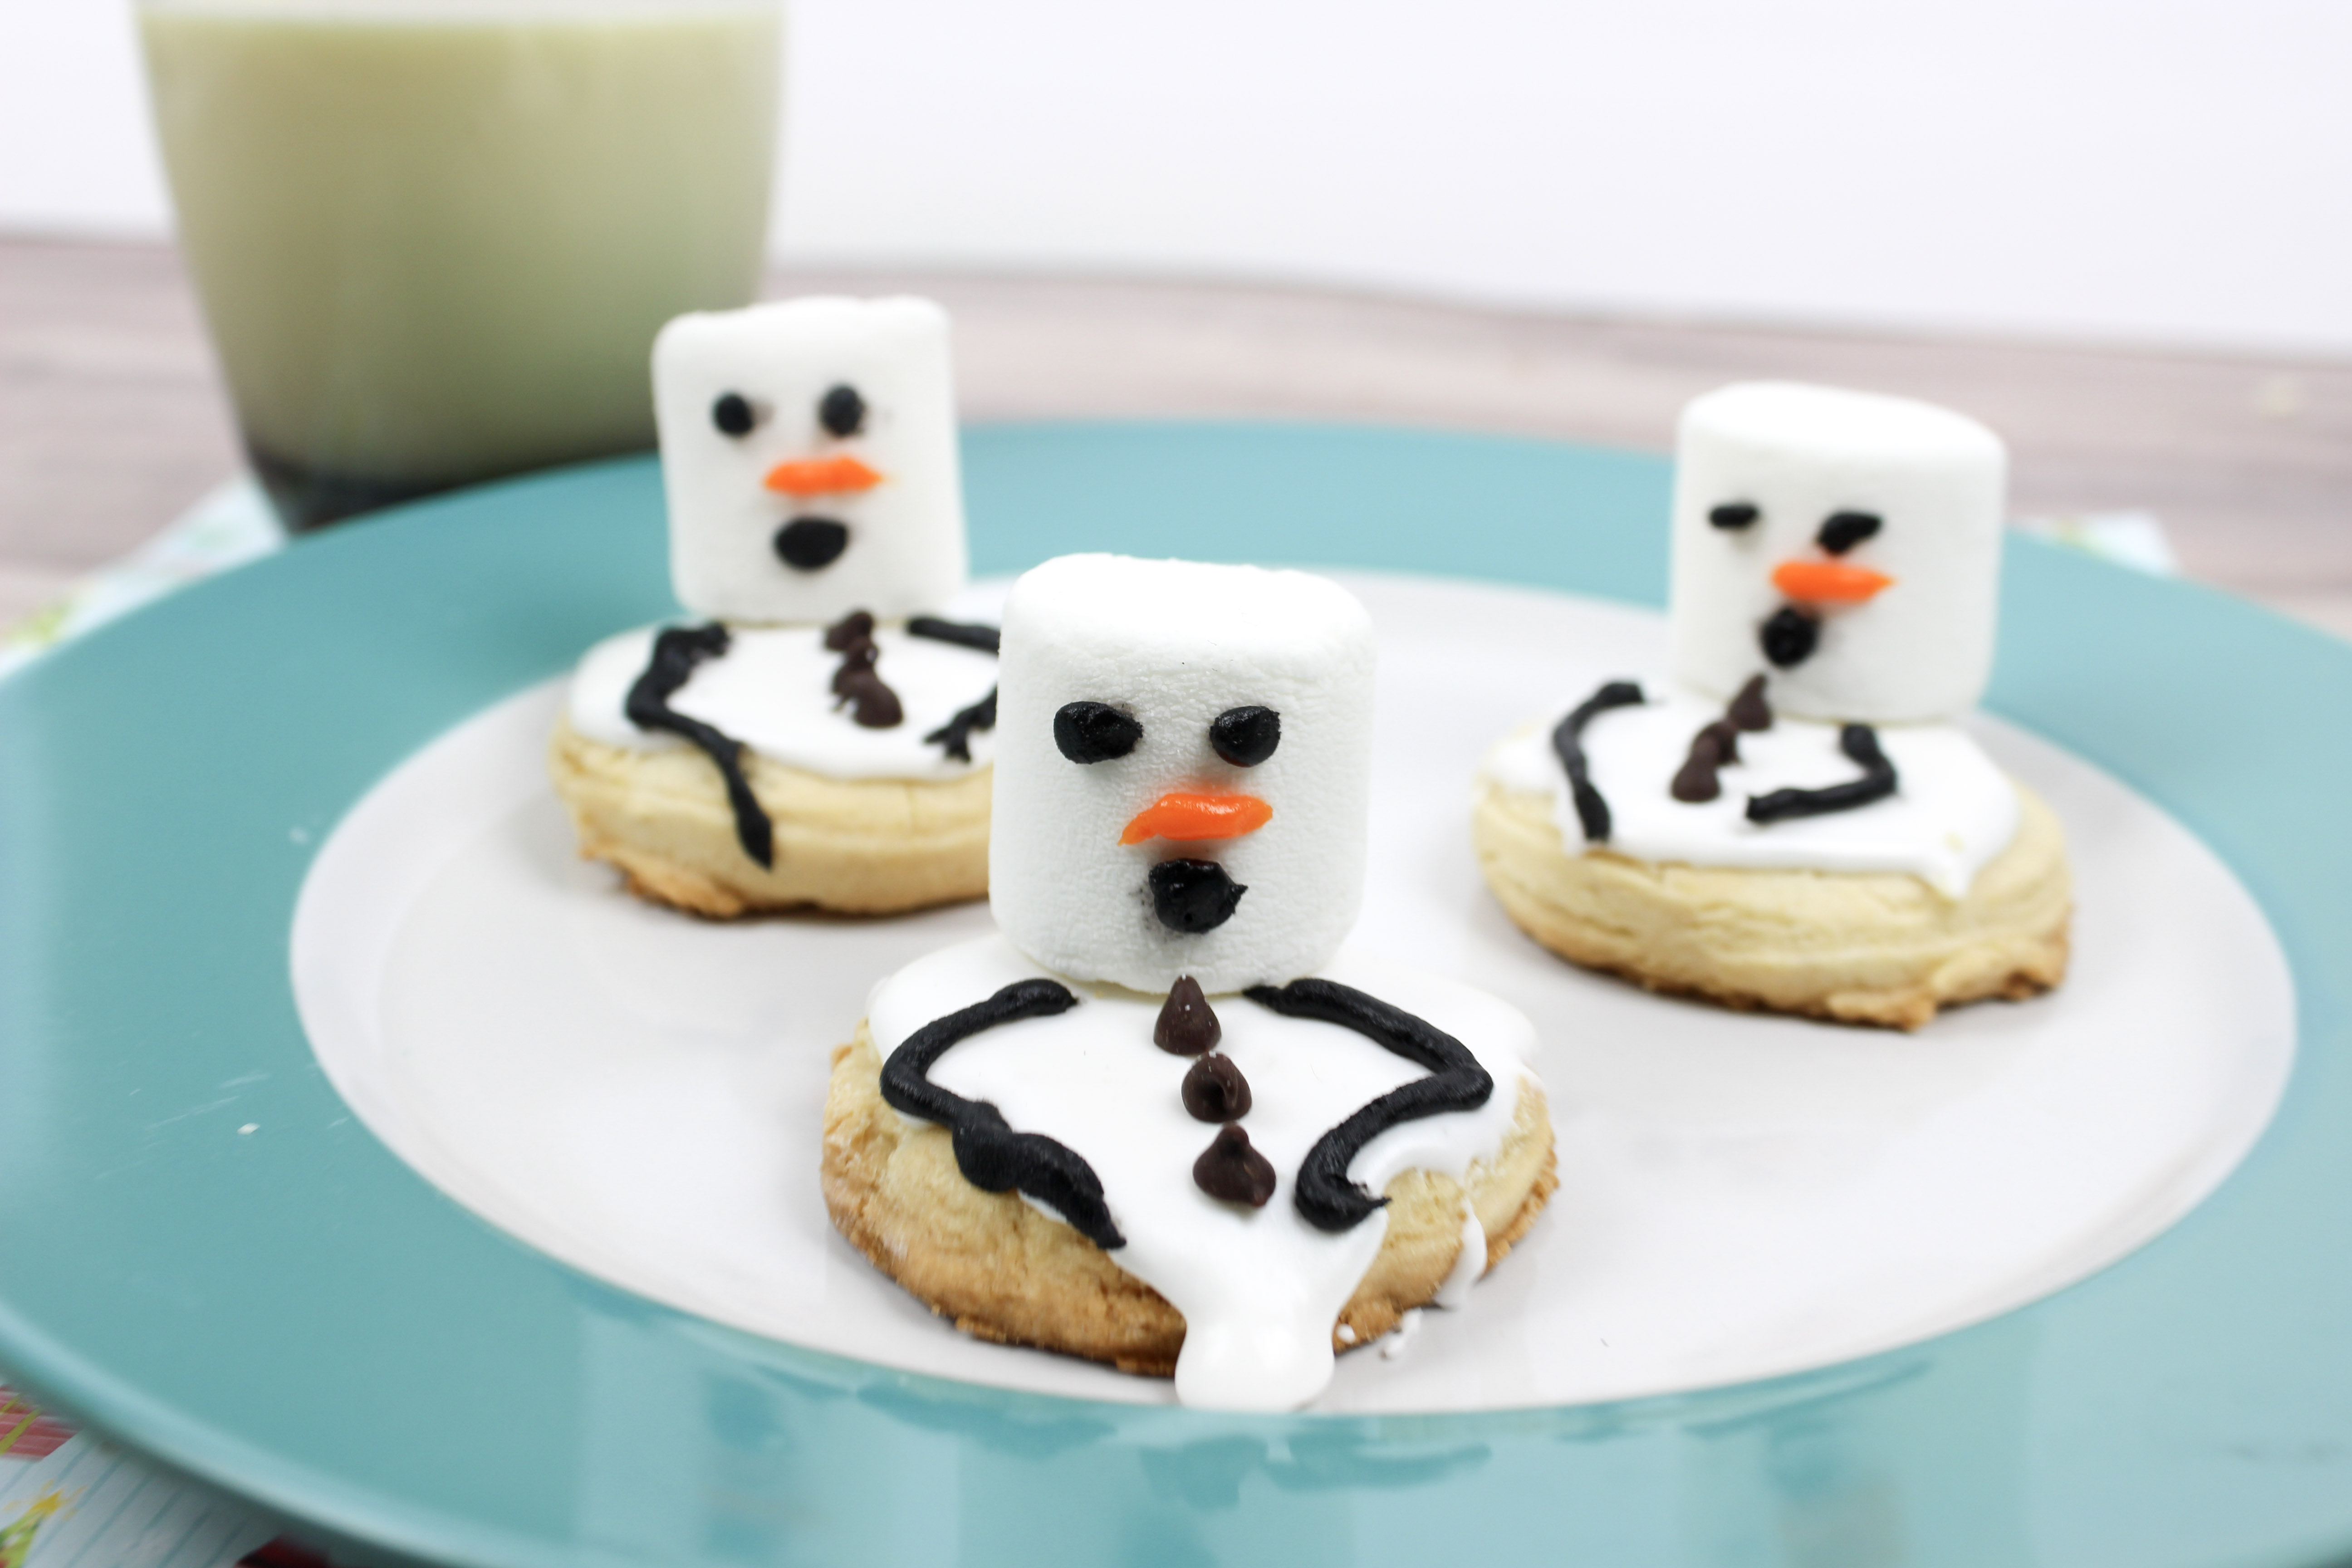 Baby it's cold outside, but with these cookies, the snowman is melting. Melted snowman cookies are a perfect treat during those long cold days. Make melting snowman cookies for parties, gifts or just because they are delicious.